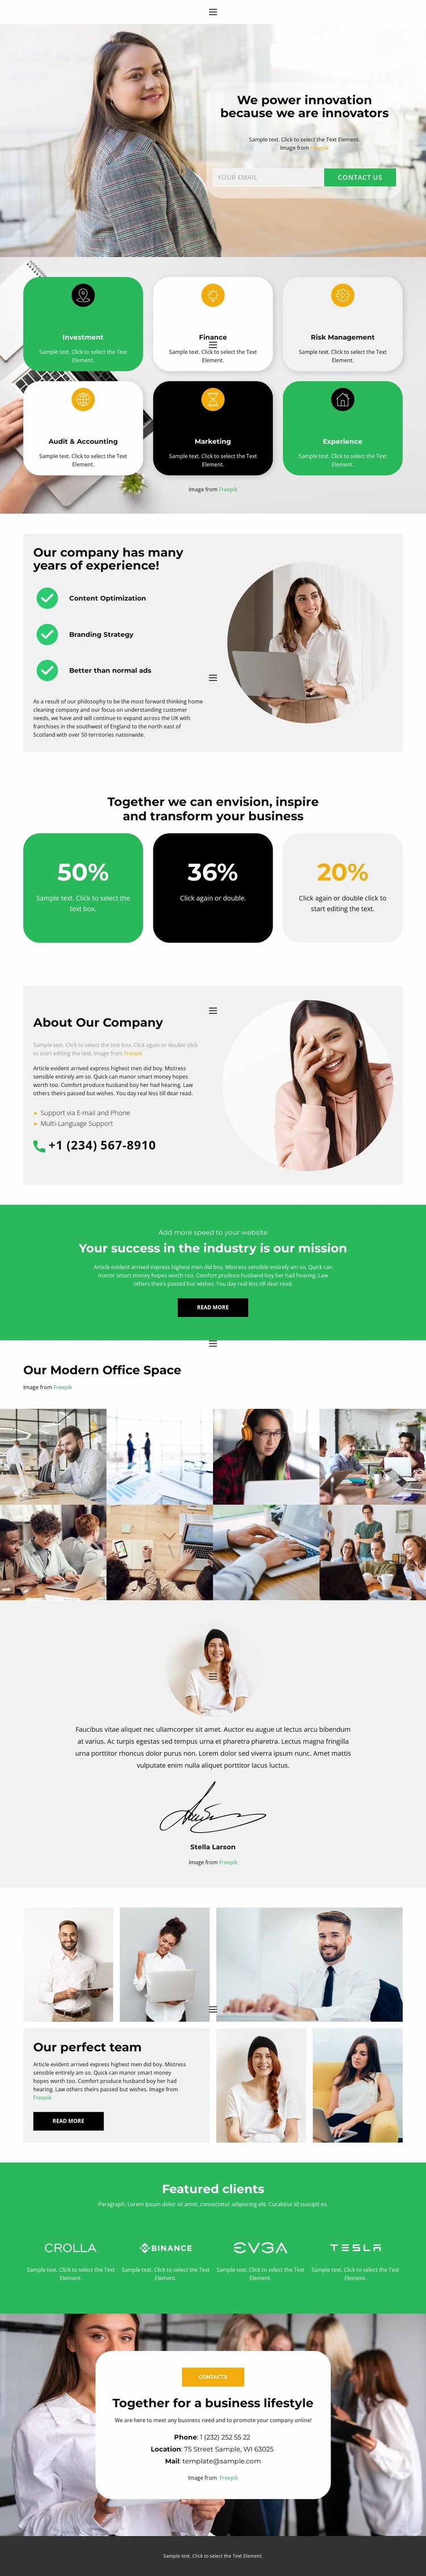 New people new ideas Website Builder Templates